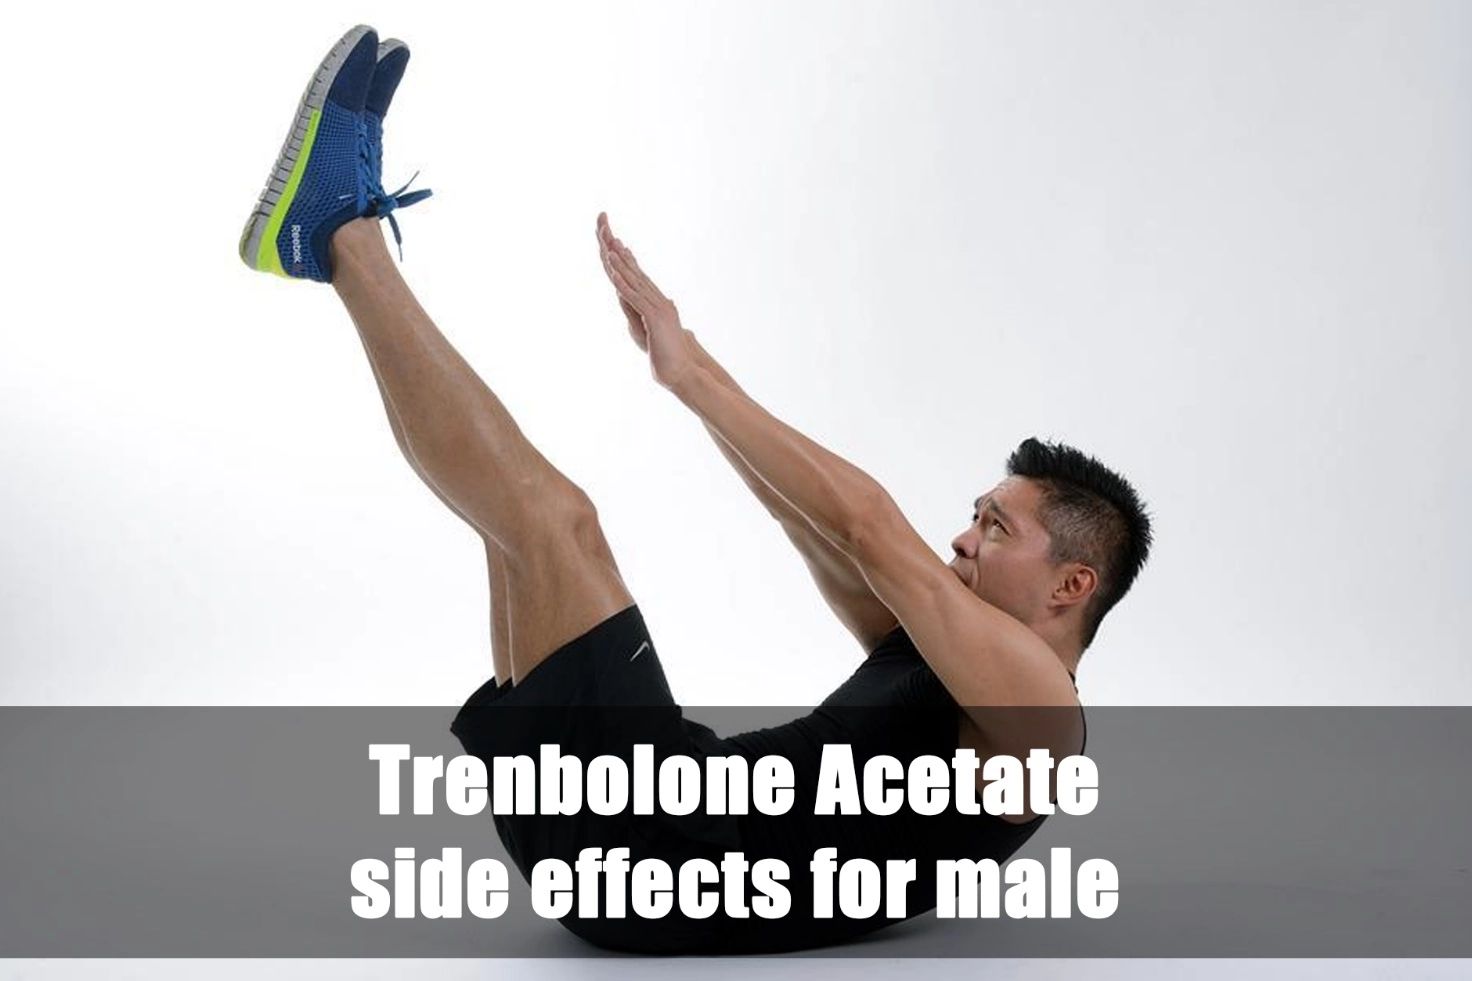 Trenbolone Acetate side effects for male